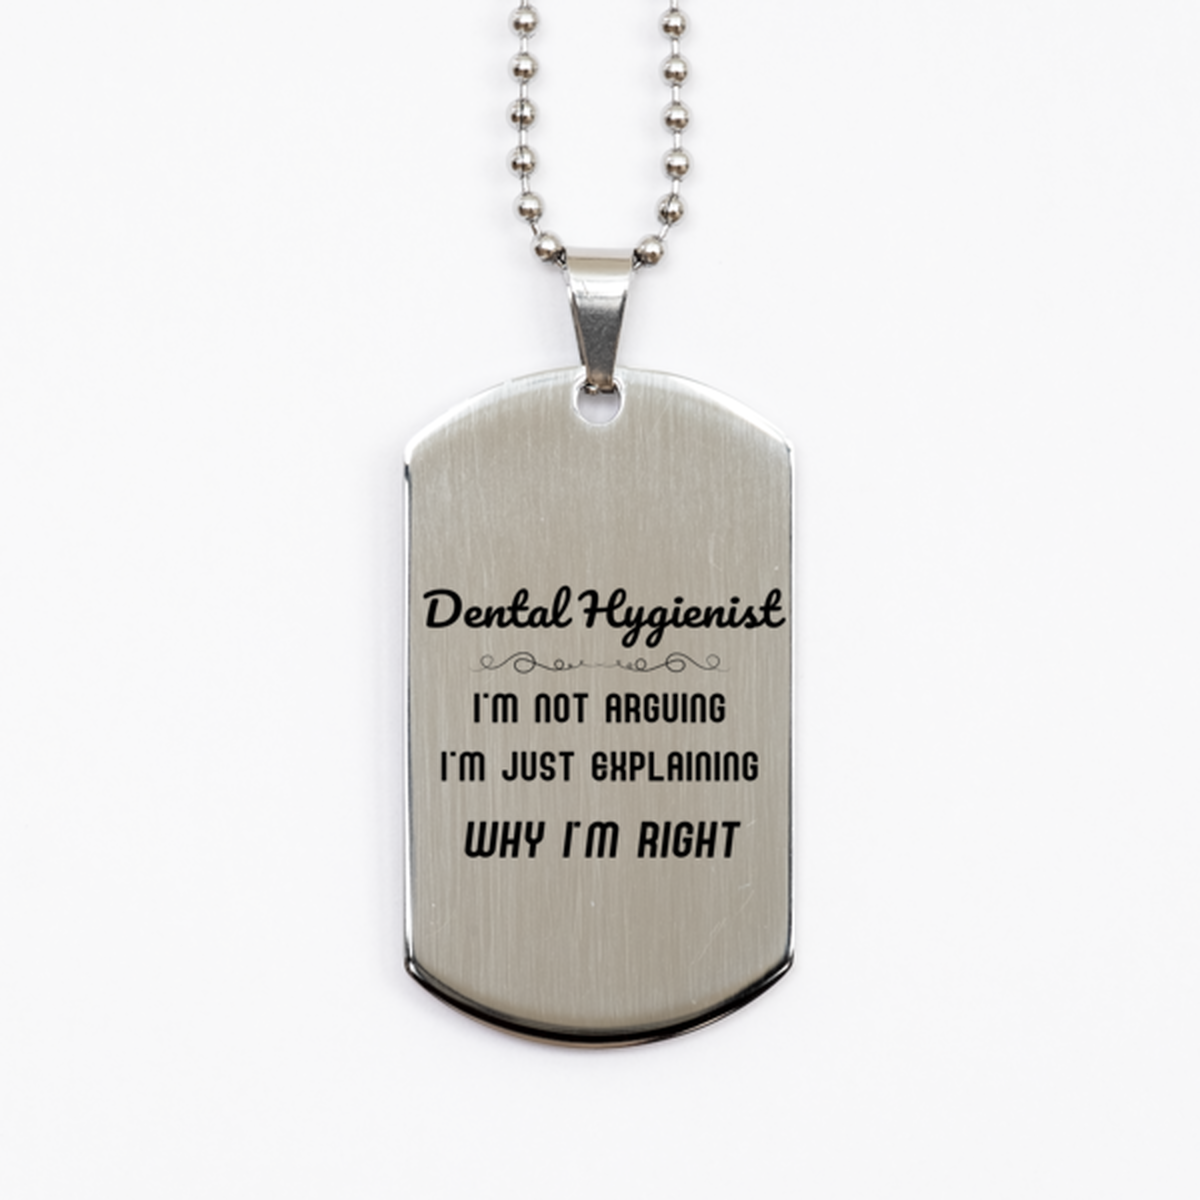 Dental Hygienist I'm not Arguing. I'm Just Explaining Why I'm RIGHT Silver Dog Tag, Funny Saying Quote Dental Hygienist Gifts For Dental Hygienist Graduation Birthday Christmas Gifts for Men Women Coworker